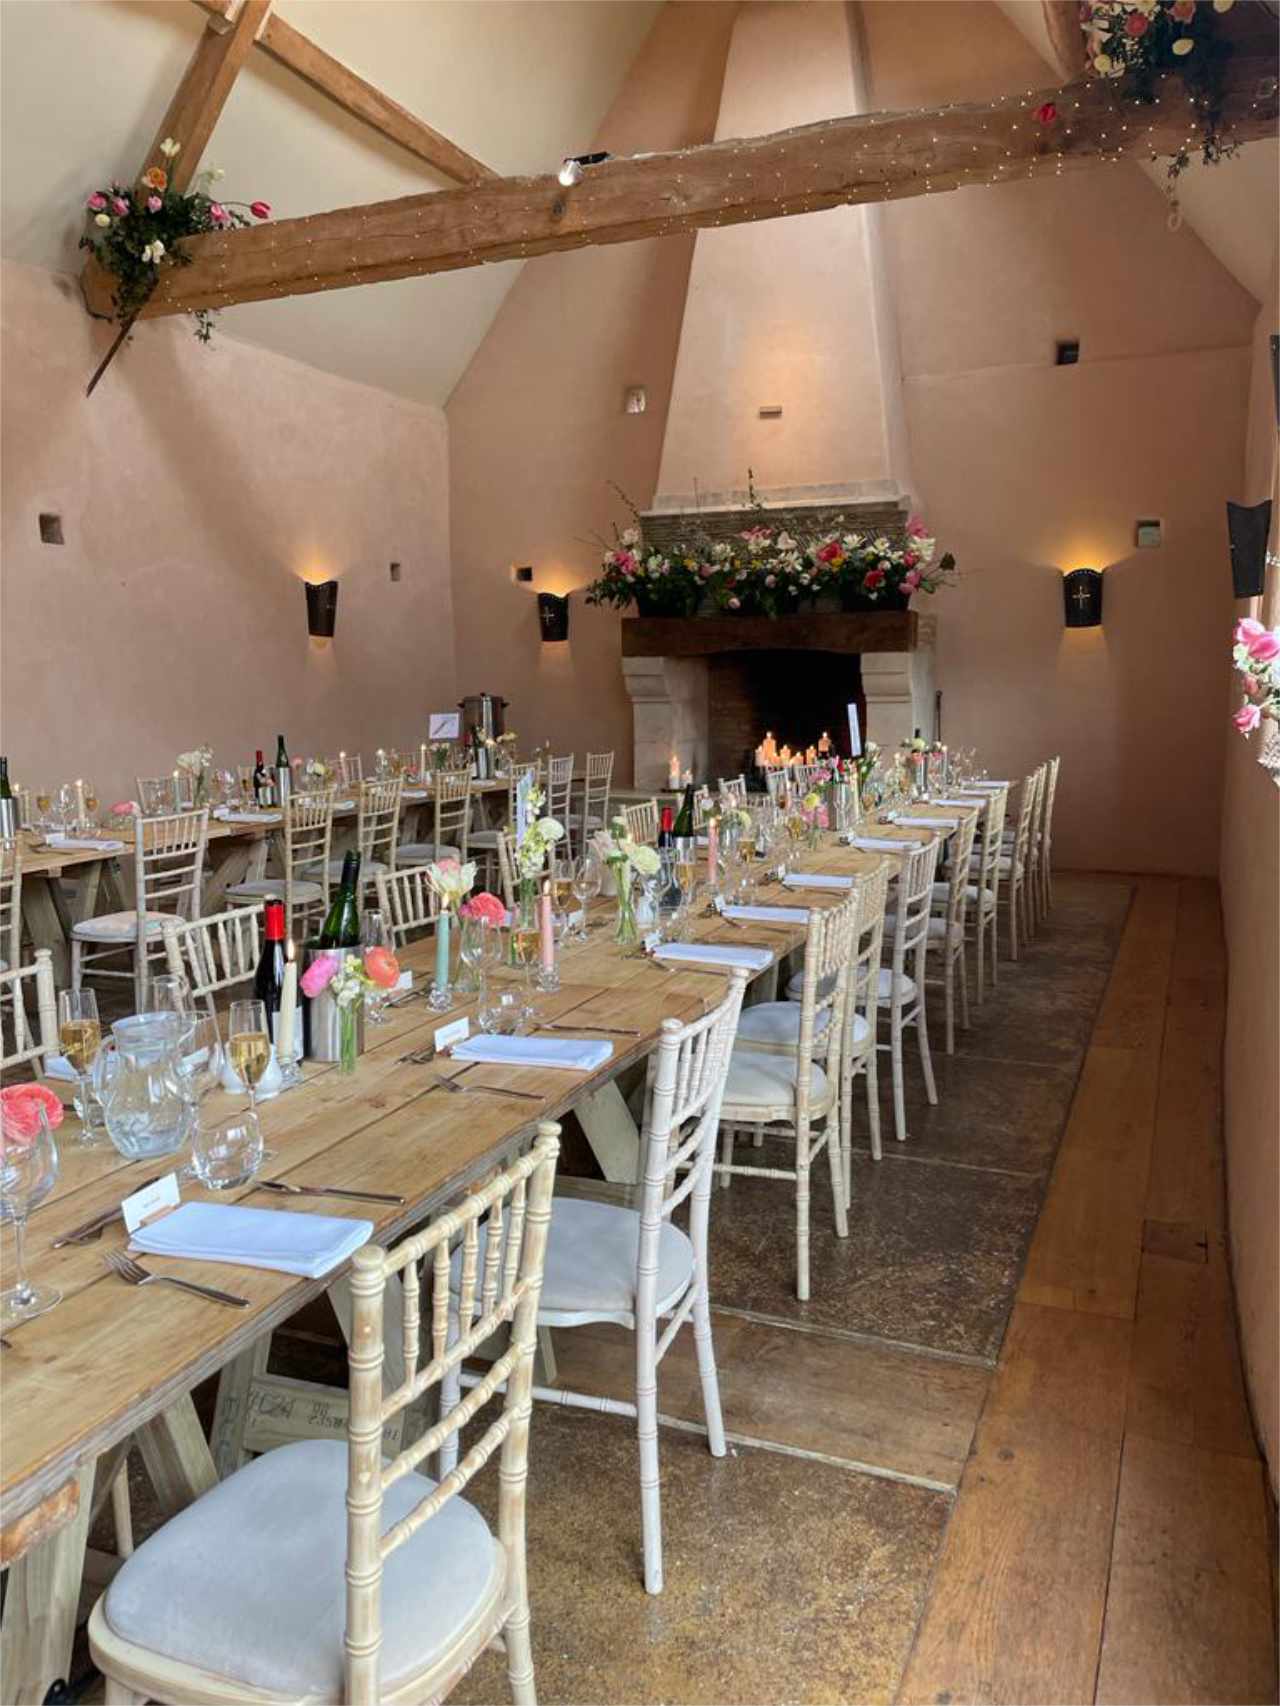 Oxleaze barn wedding with table flowers and mantle flowers